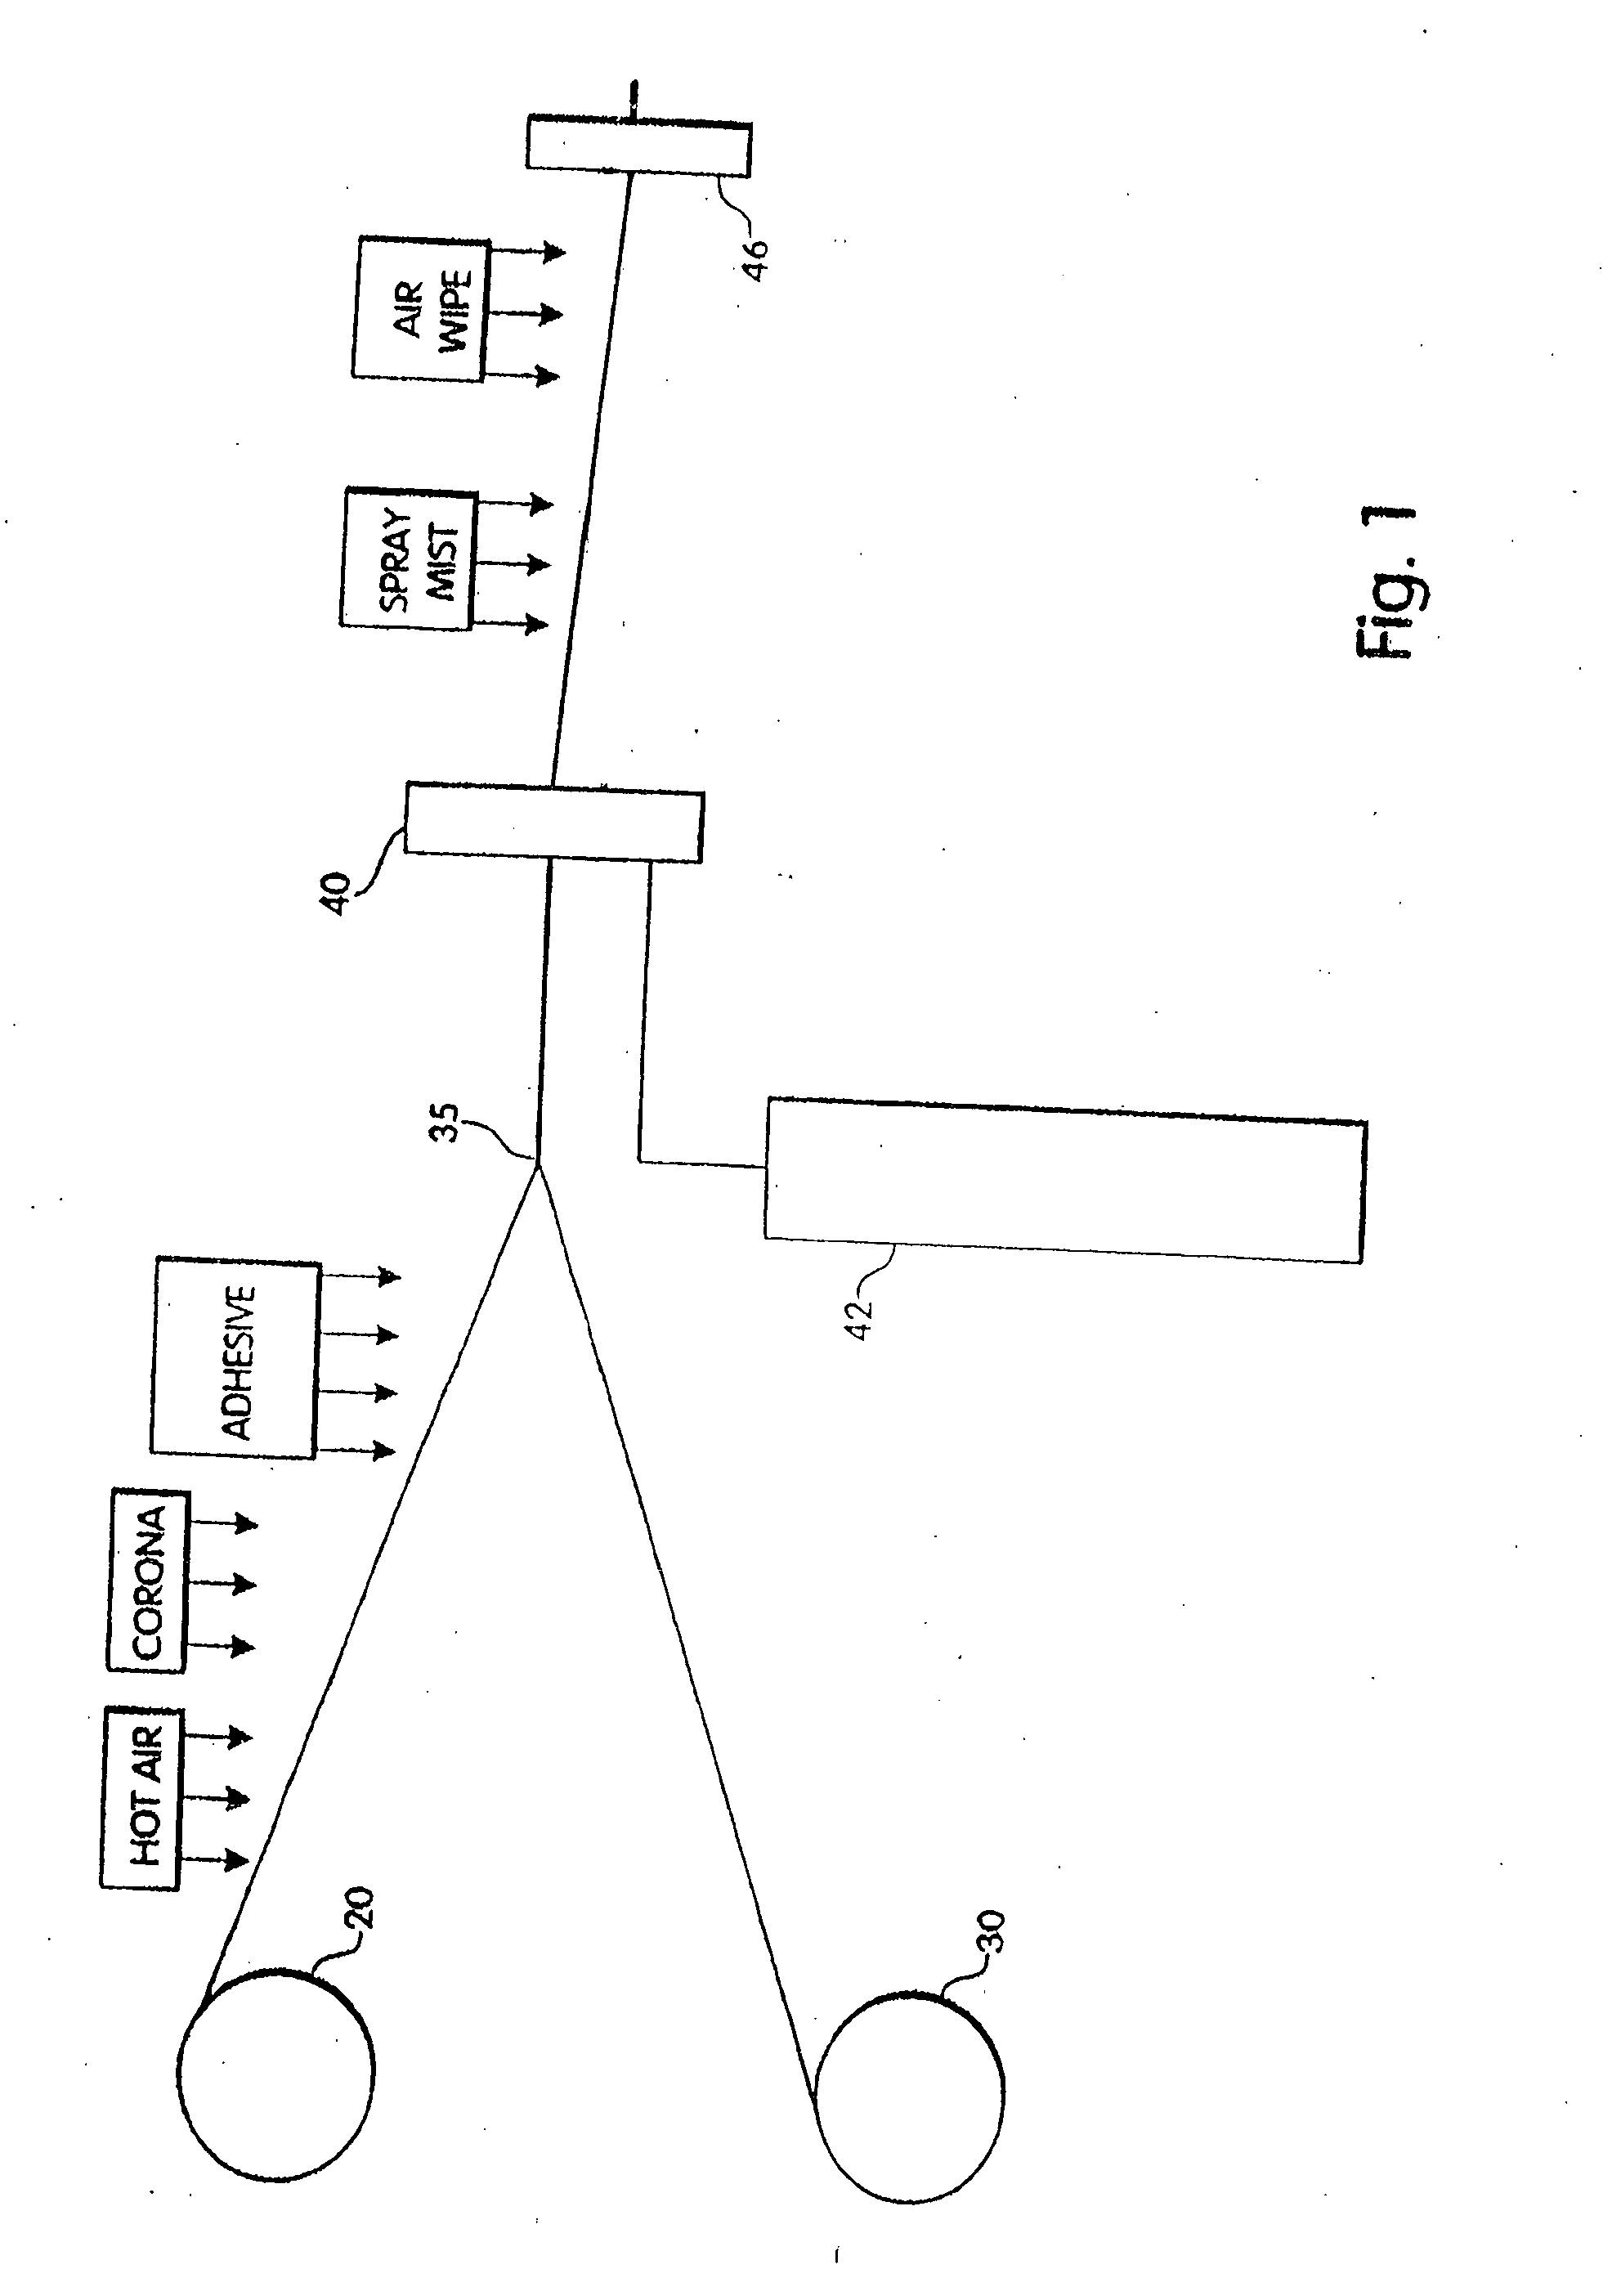 Systems and methods for manufacturing reinforced weatherstrip